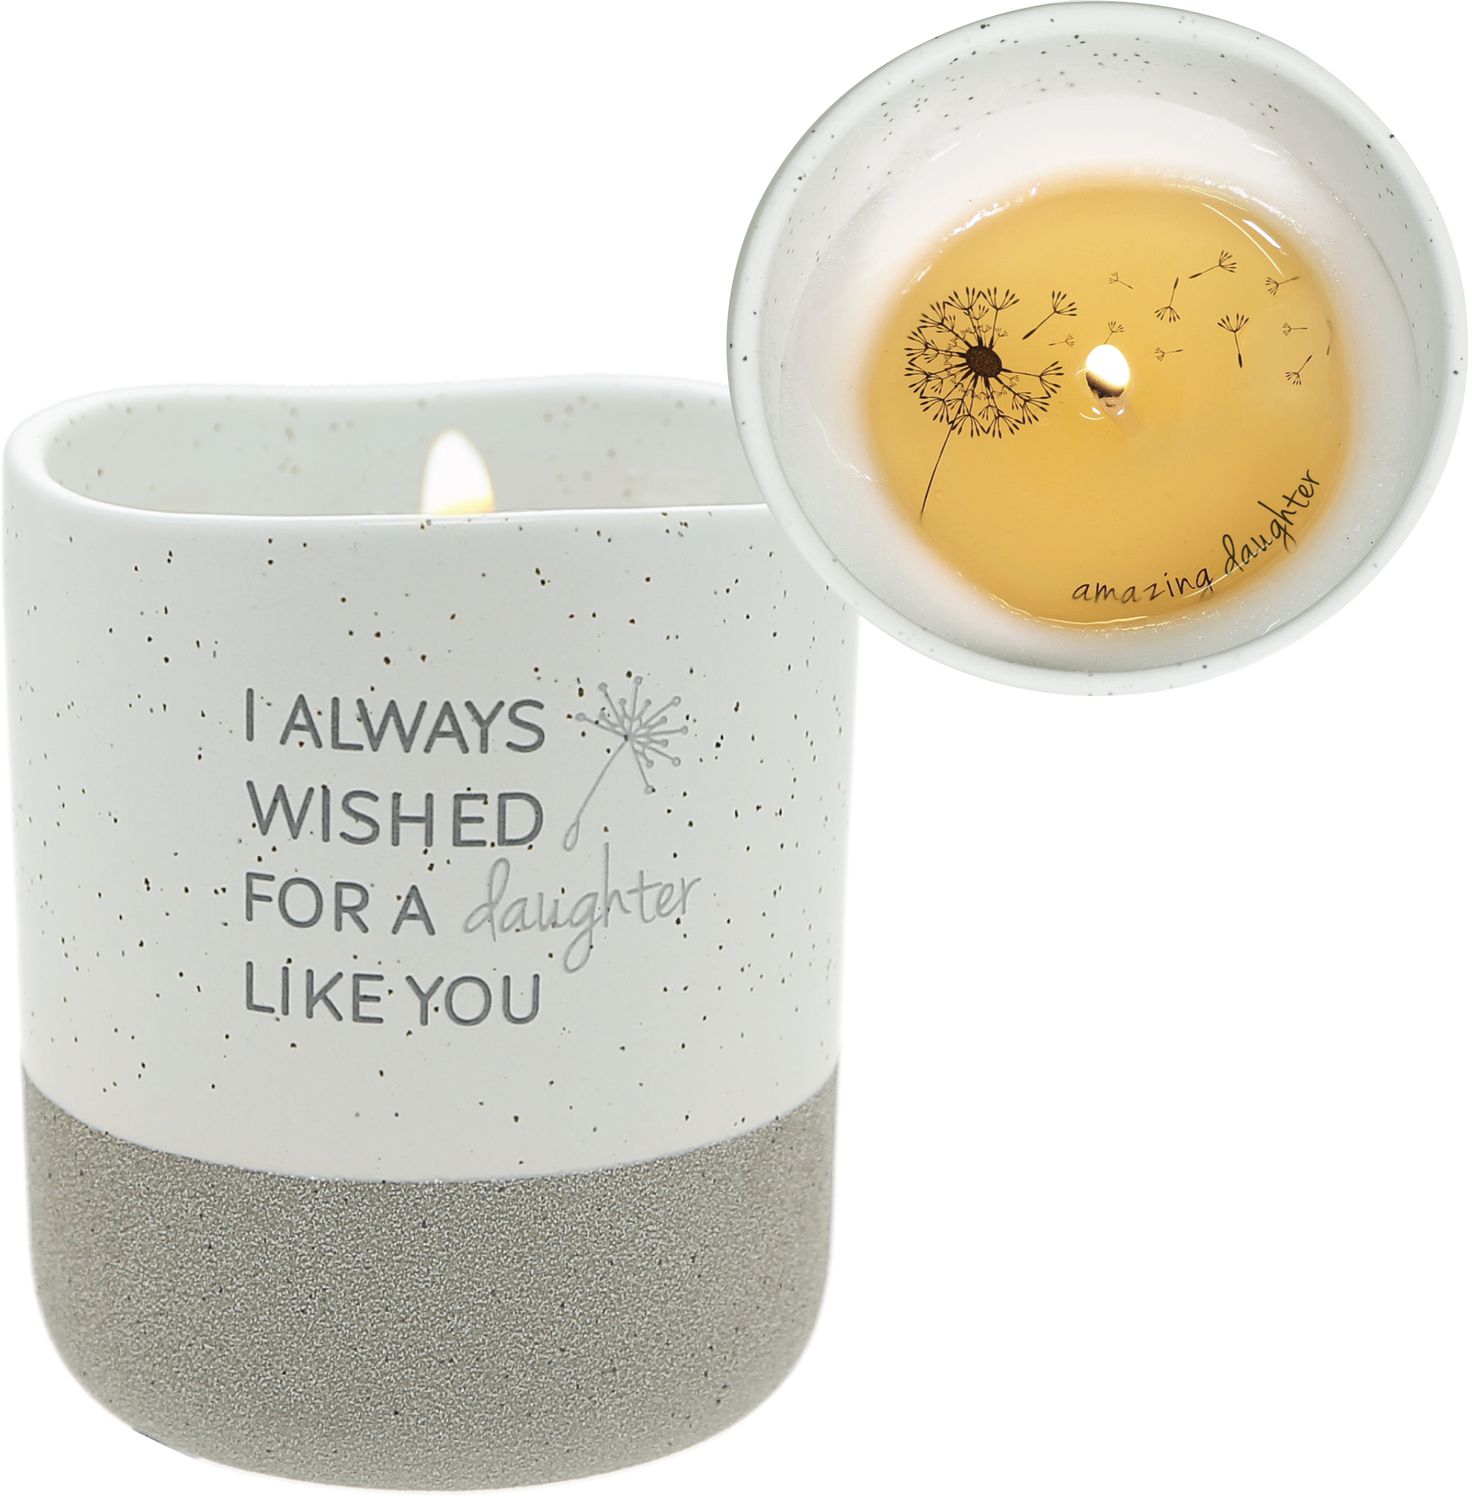 Daughter Like You by I Always Wished - Daughter Like You - 10 oz - 100% Soy Wax Reveal Candle
Scent: Tranquility